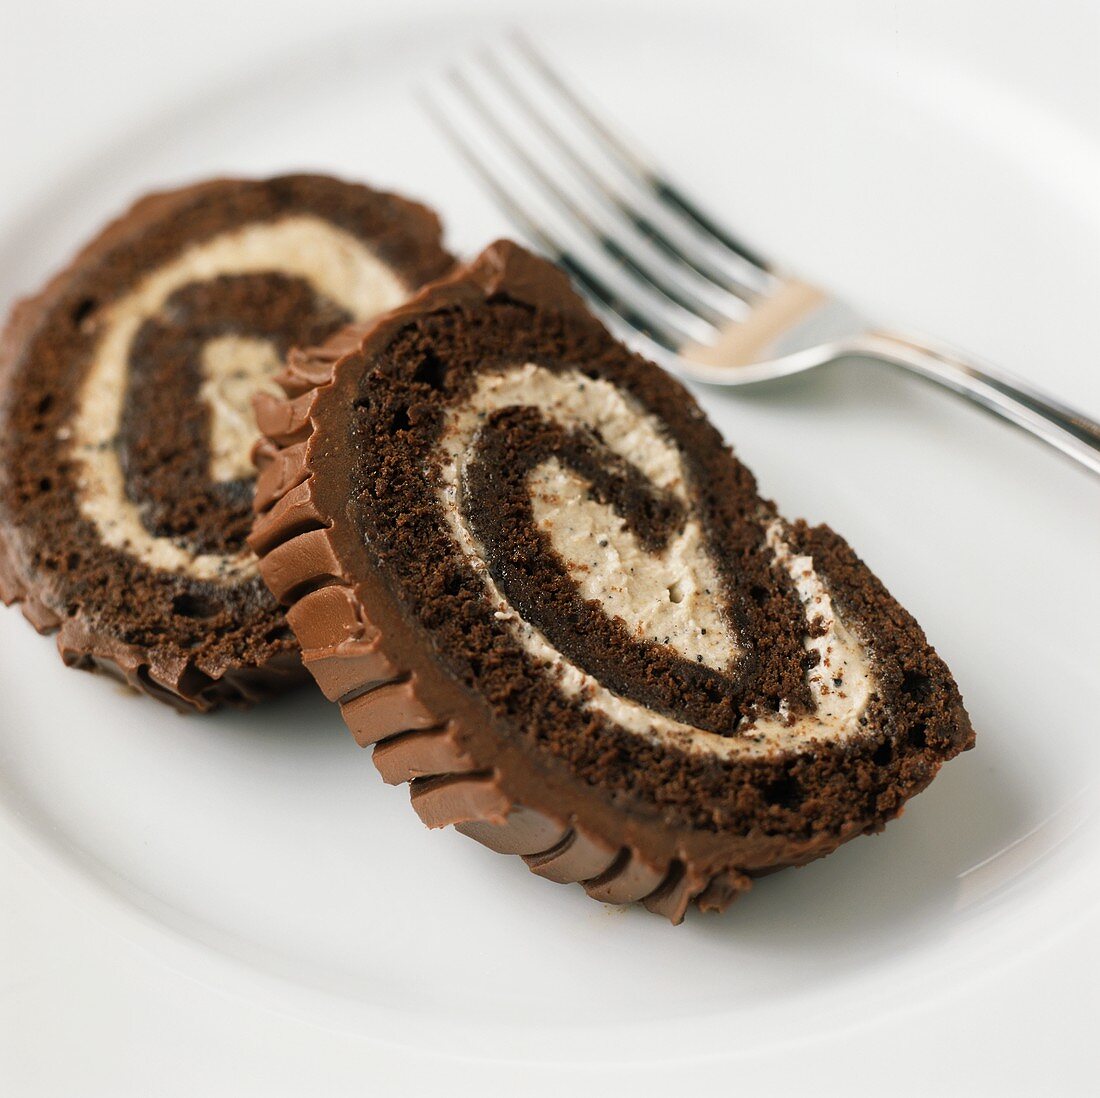 Two slices of chocolate Swiss roll with vanilla cream